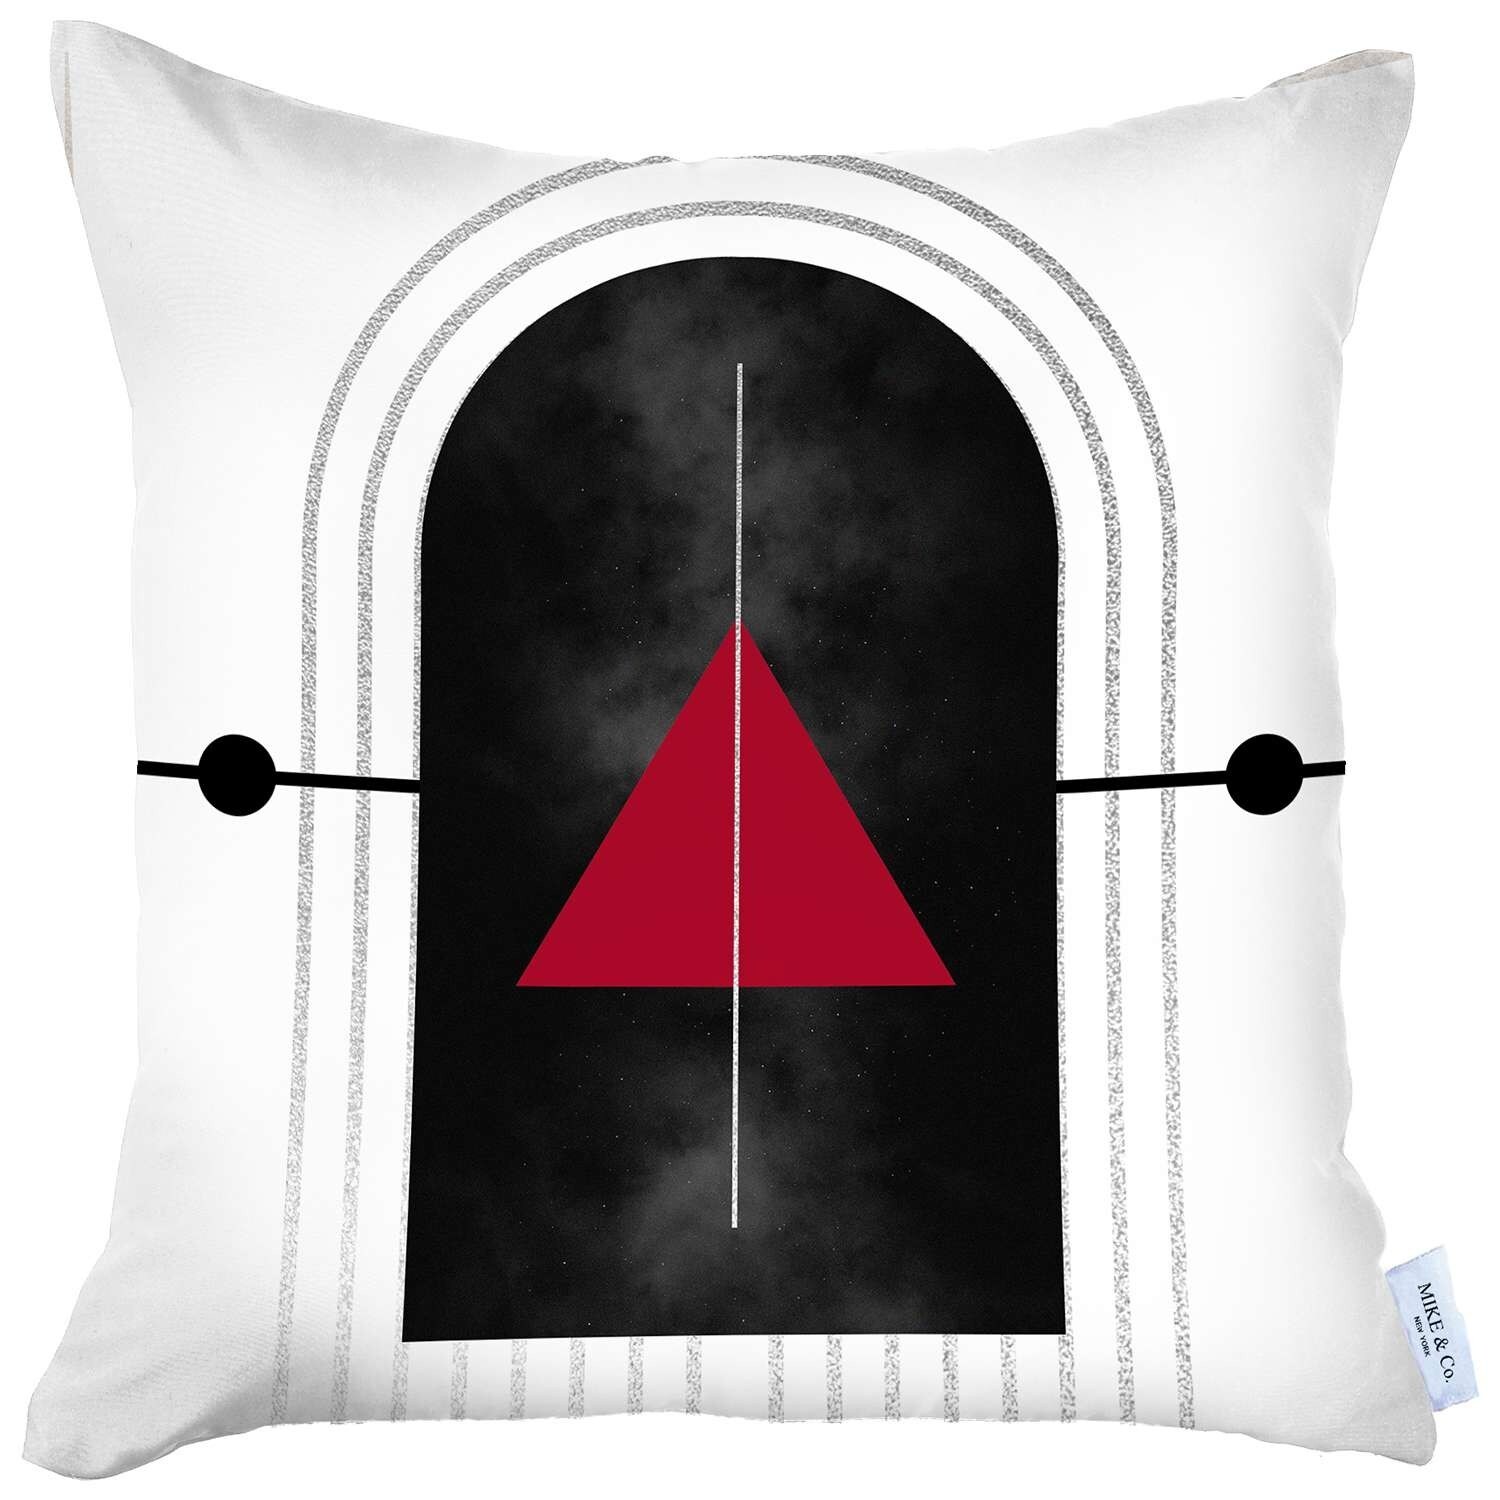 https://ak1.ostkcdn.com/images/products/is/images/direct/9e2efd65f536571ead588f52d97e28e7176edf4c/Red-and-Cream-Arrowhead-Printed-Throw-Pillow.jpg